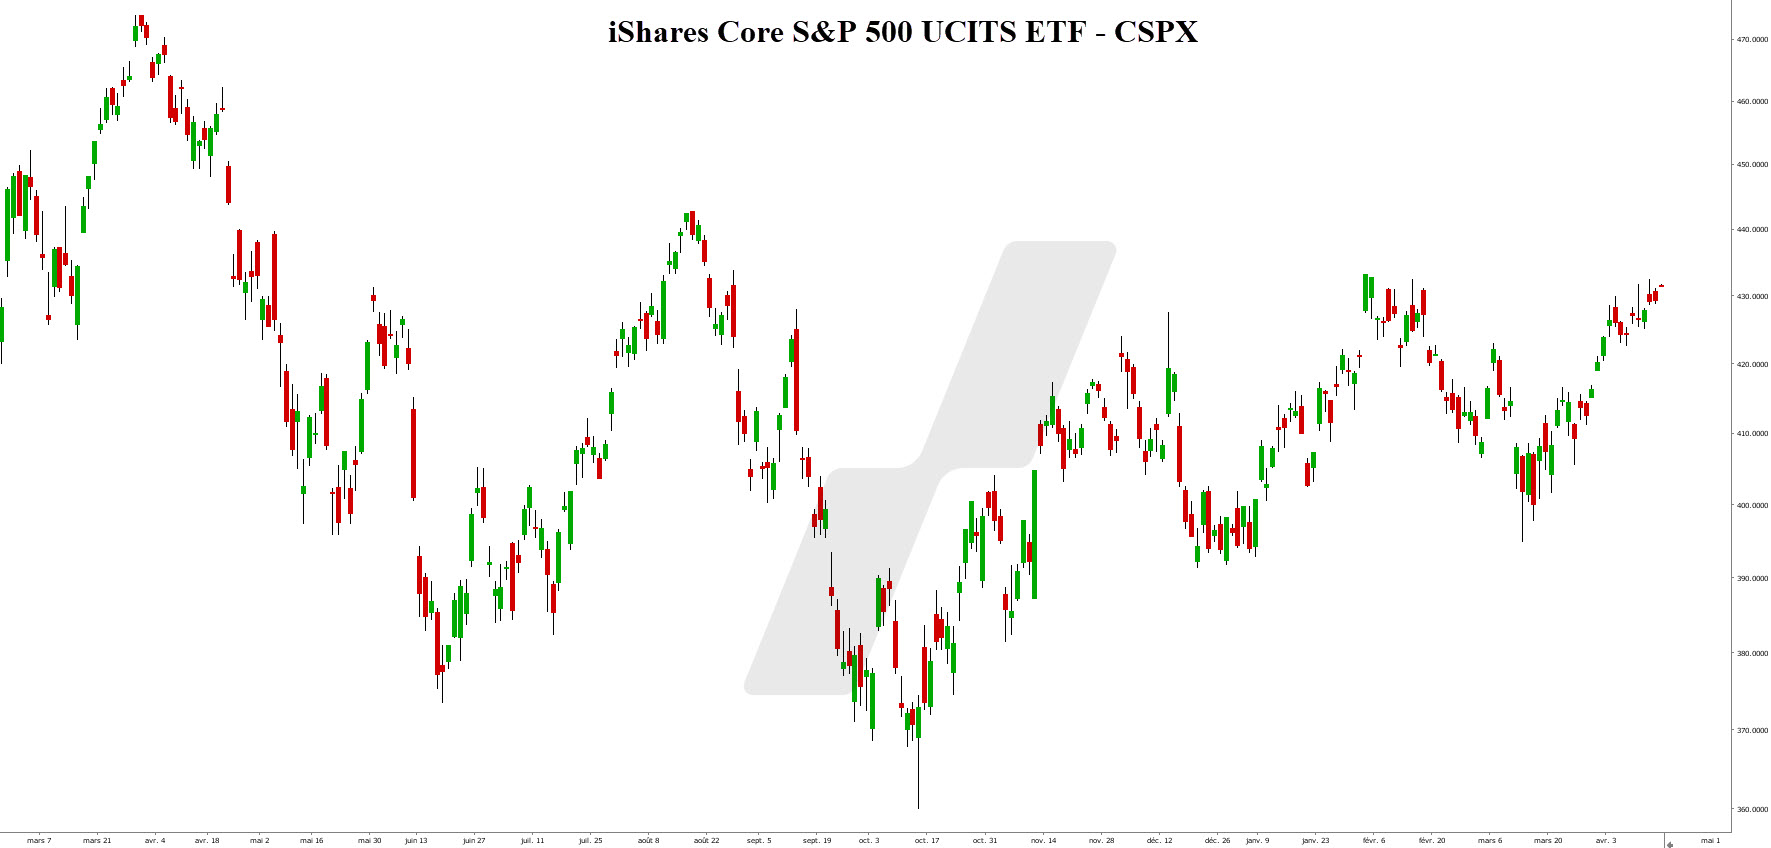 iShares Core S&P 500 UCITIS ETF - CSPX - graph 170423